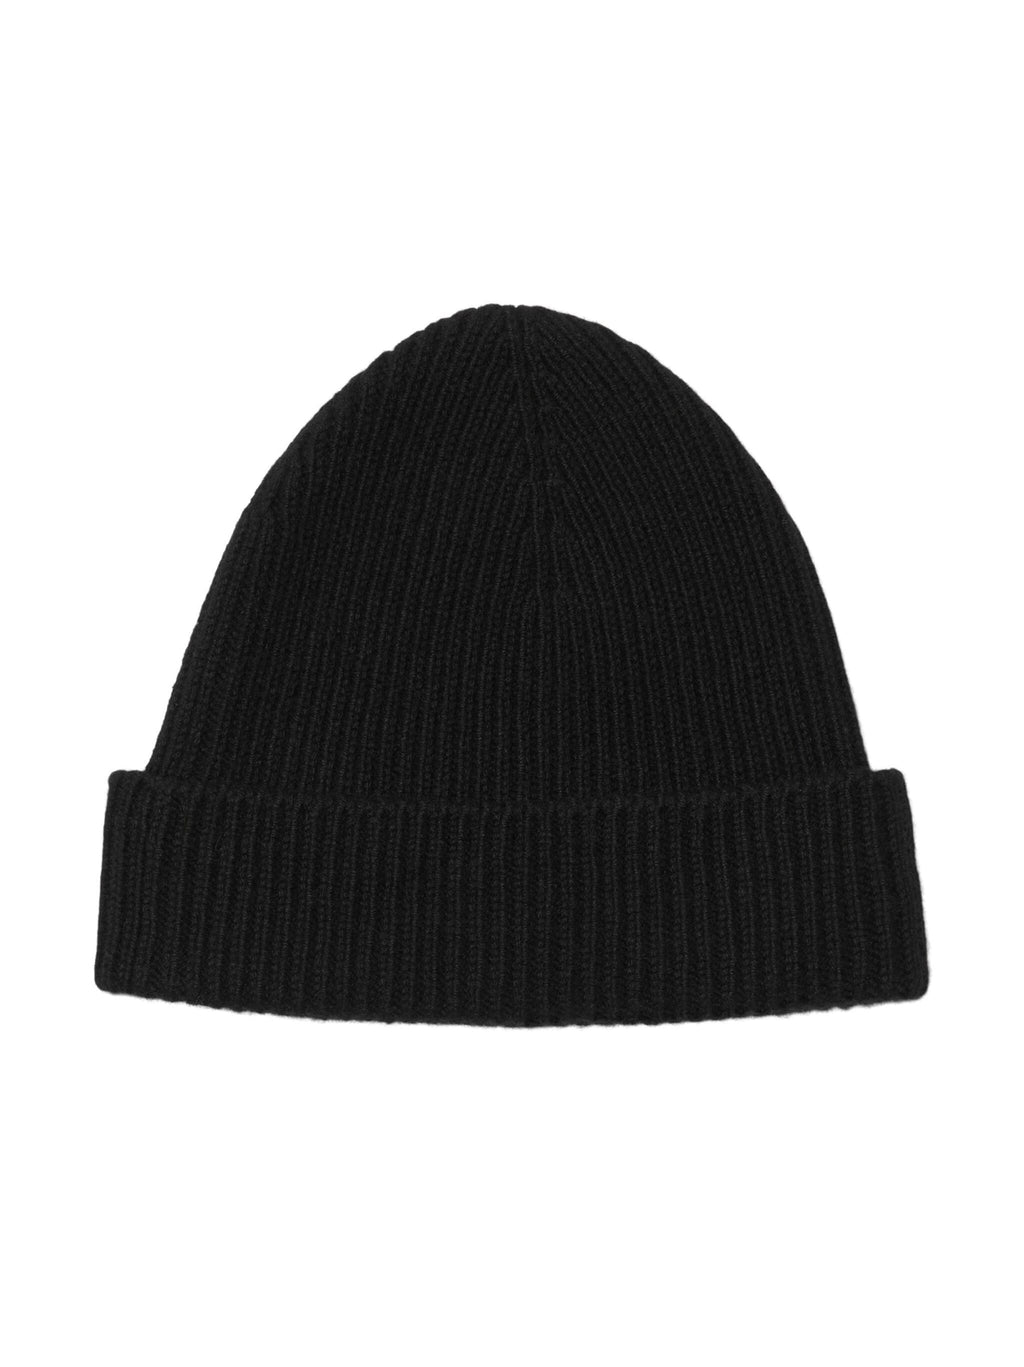 BURBERRY Unisex Ribbed Cashmere Beanie